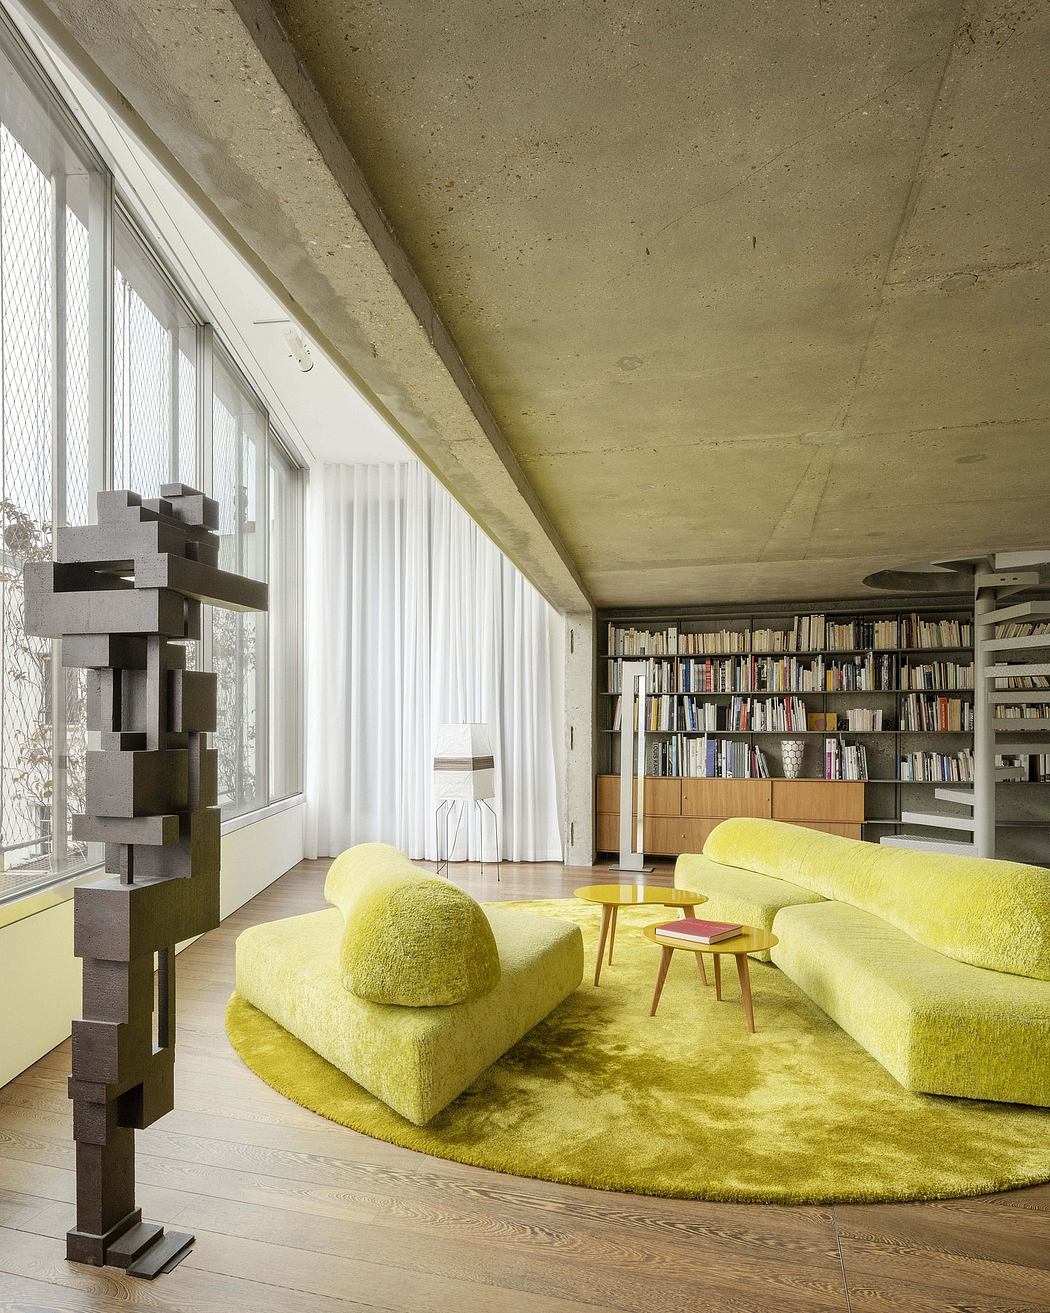 Minimalist living room with concrete walls, floor-to-ceiling windows, and vibrant yellow seating.